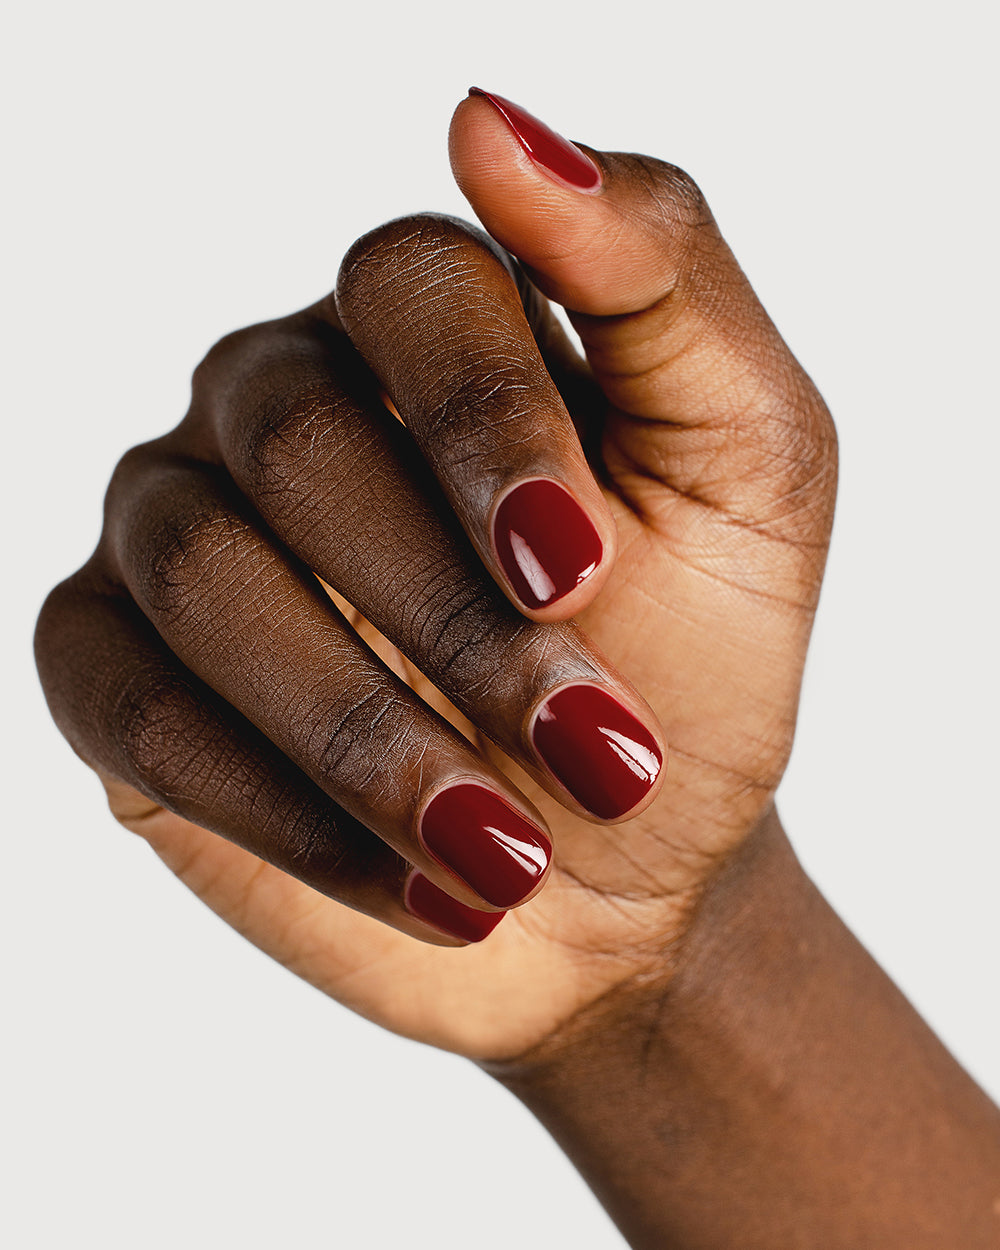 Wine Color Nails: 50+ Ideas For This Trending Nail Style